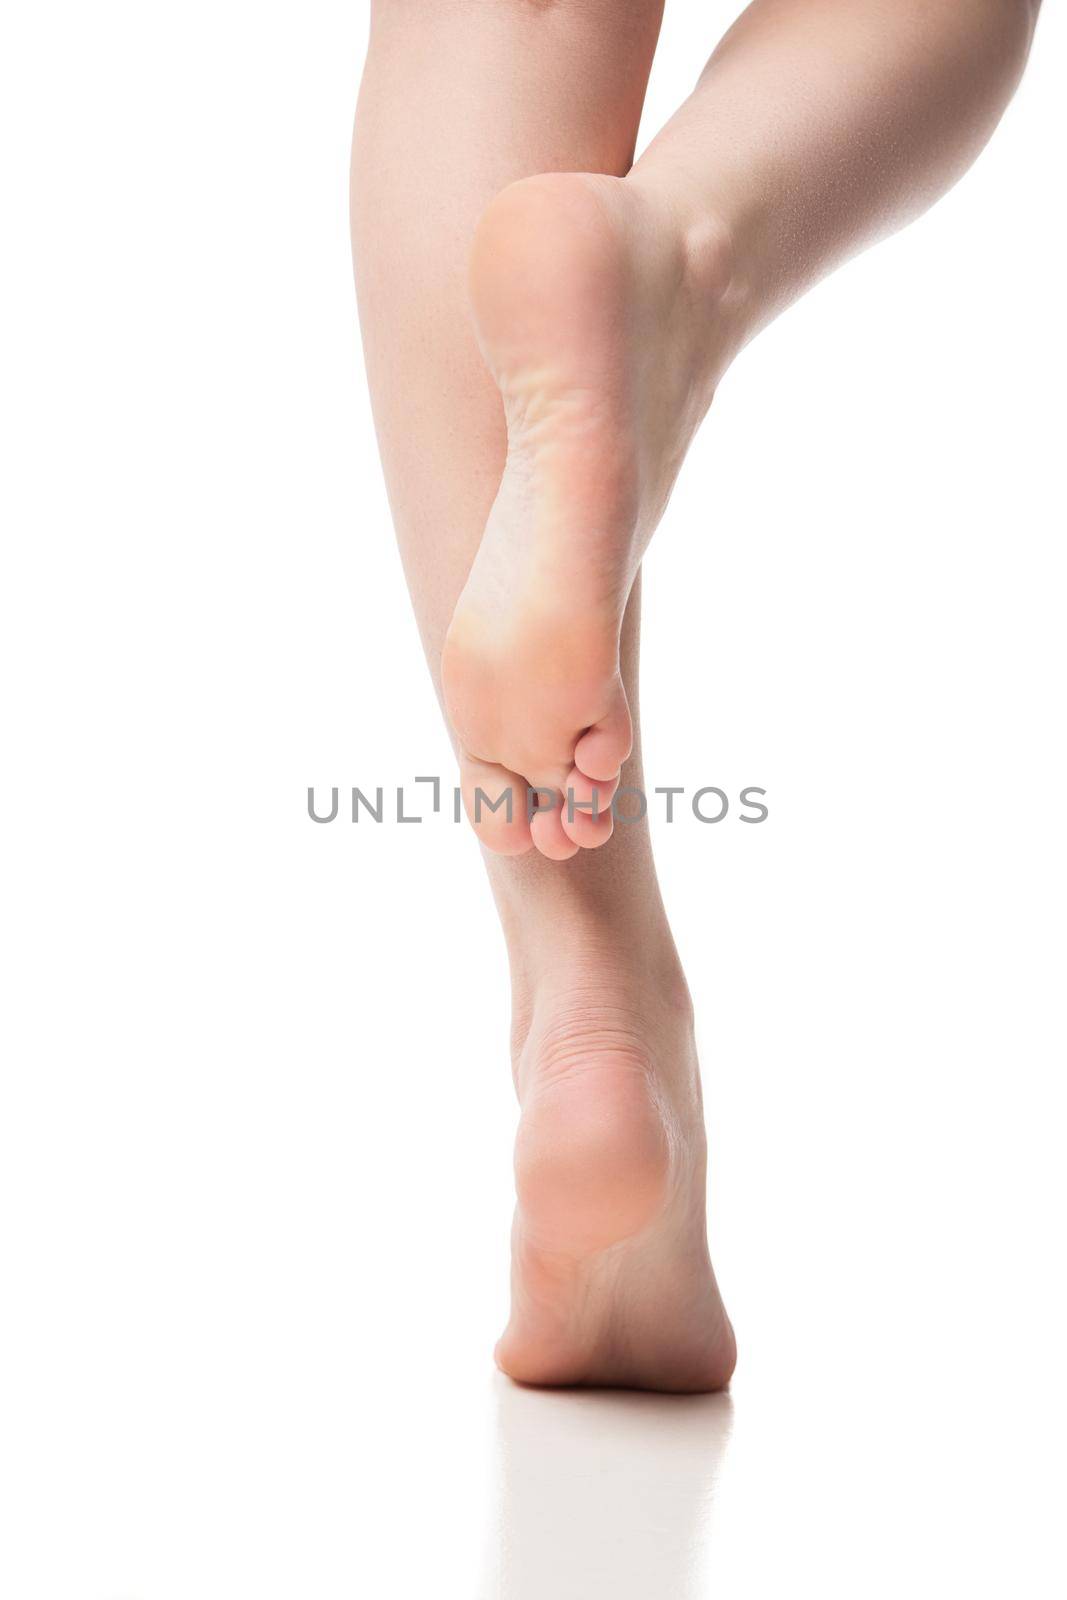 Back view of woman foot on white background, isolated, close-up by Julenochek